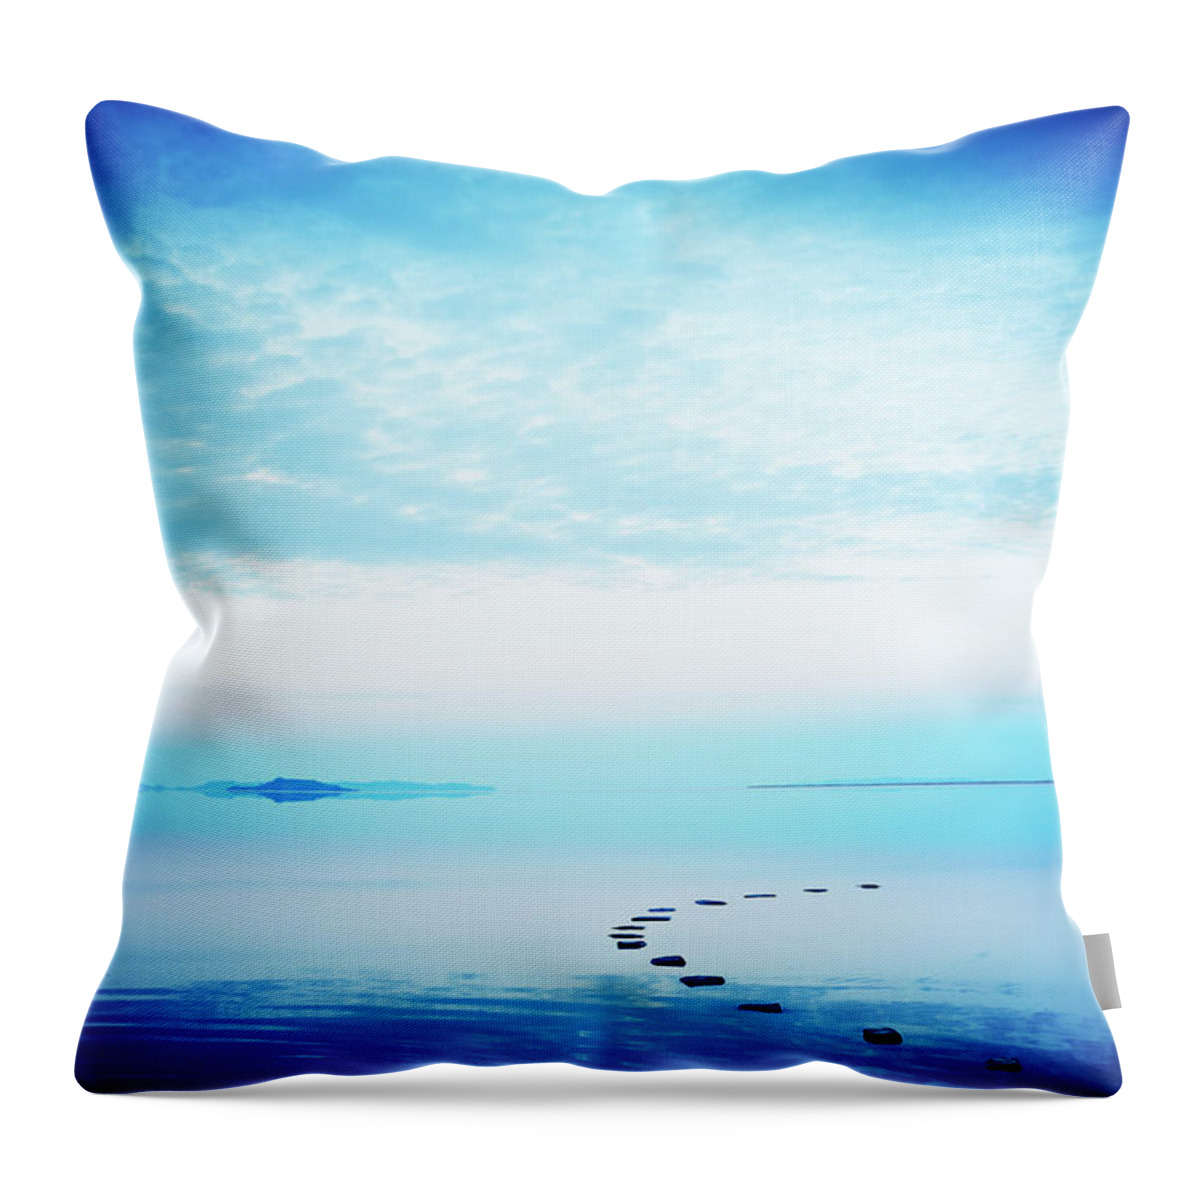 Scenics Throw Pillow featuring the photograph Stone Path In Calm Lake At Sunset by Thomas Barwick